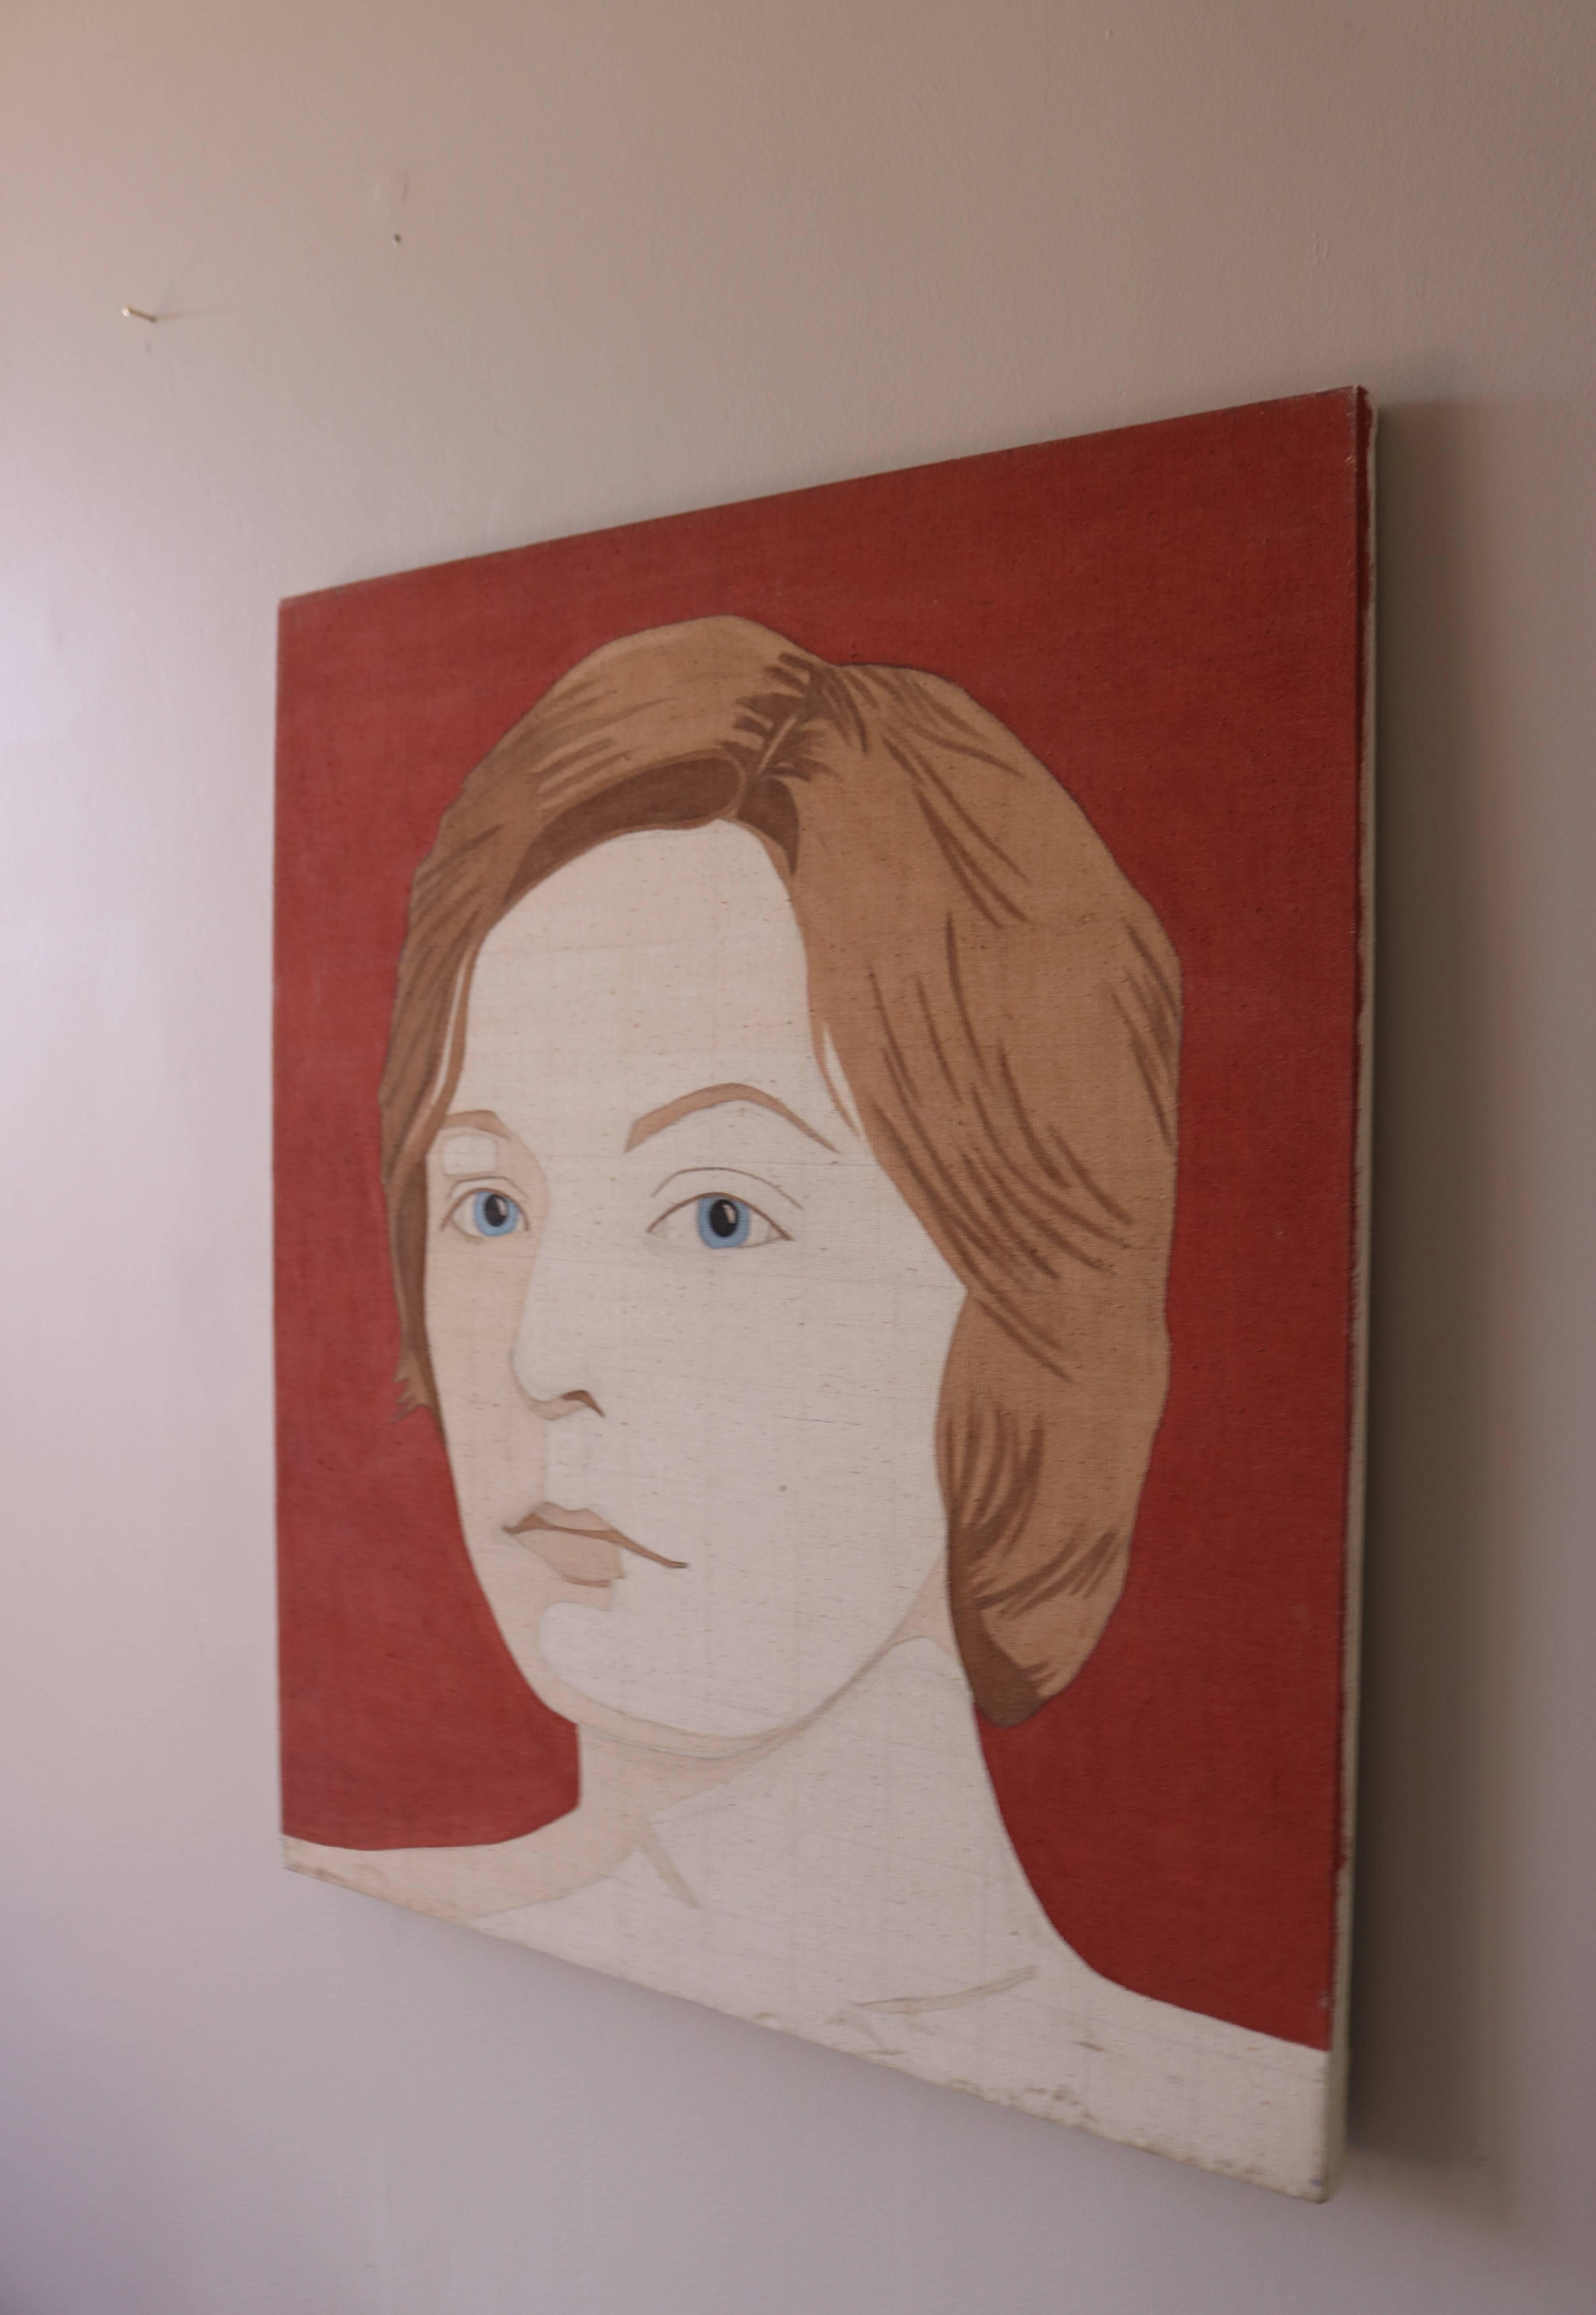 This is one portrait in a suite of four that we will be offering here. This vintage painting on canvas depicts a cool brunette beauty with blue eyes. On canvas. The artist's thin washes of paint allow for the original pencil lines and grid work to